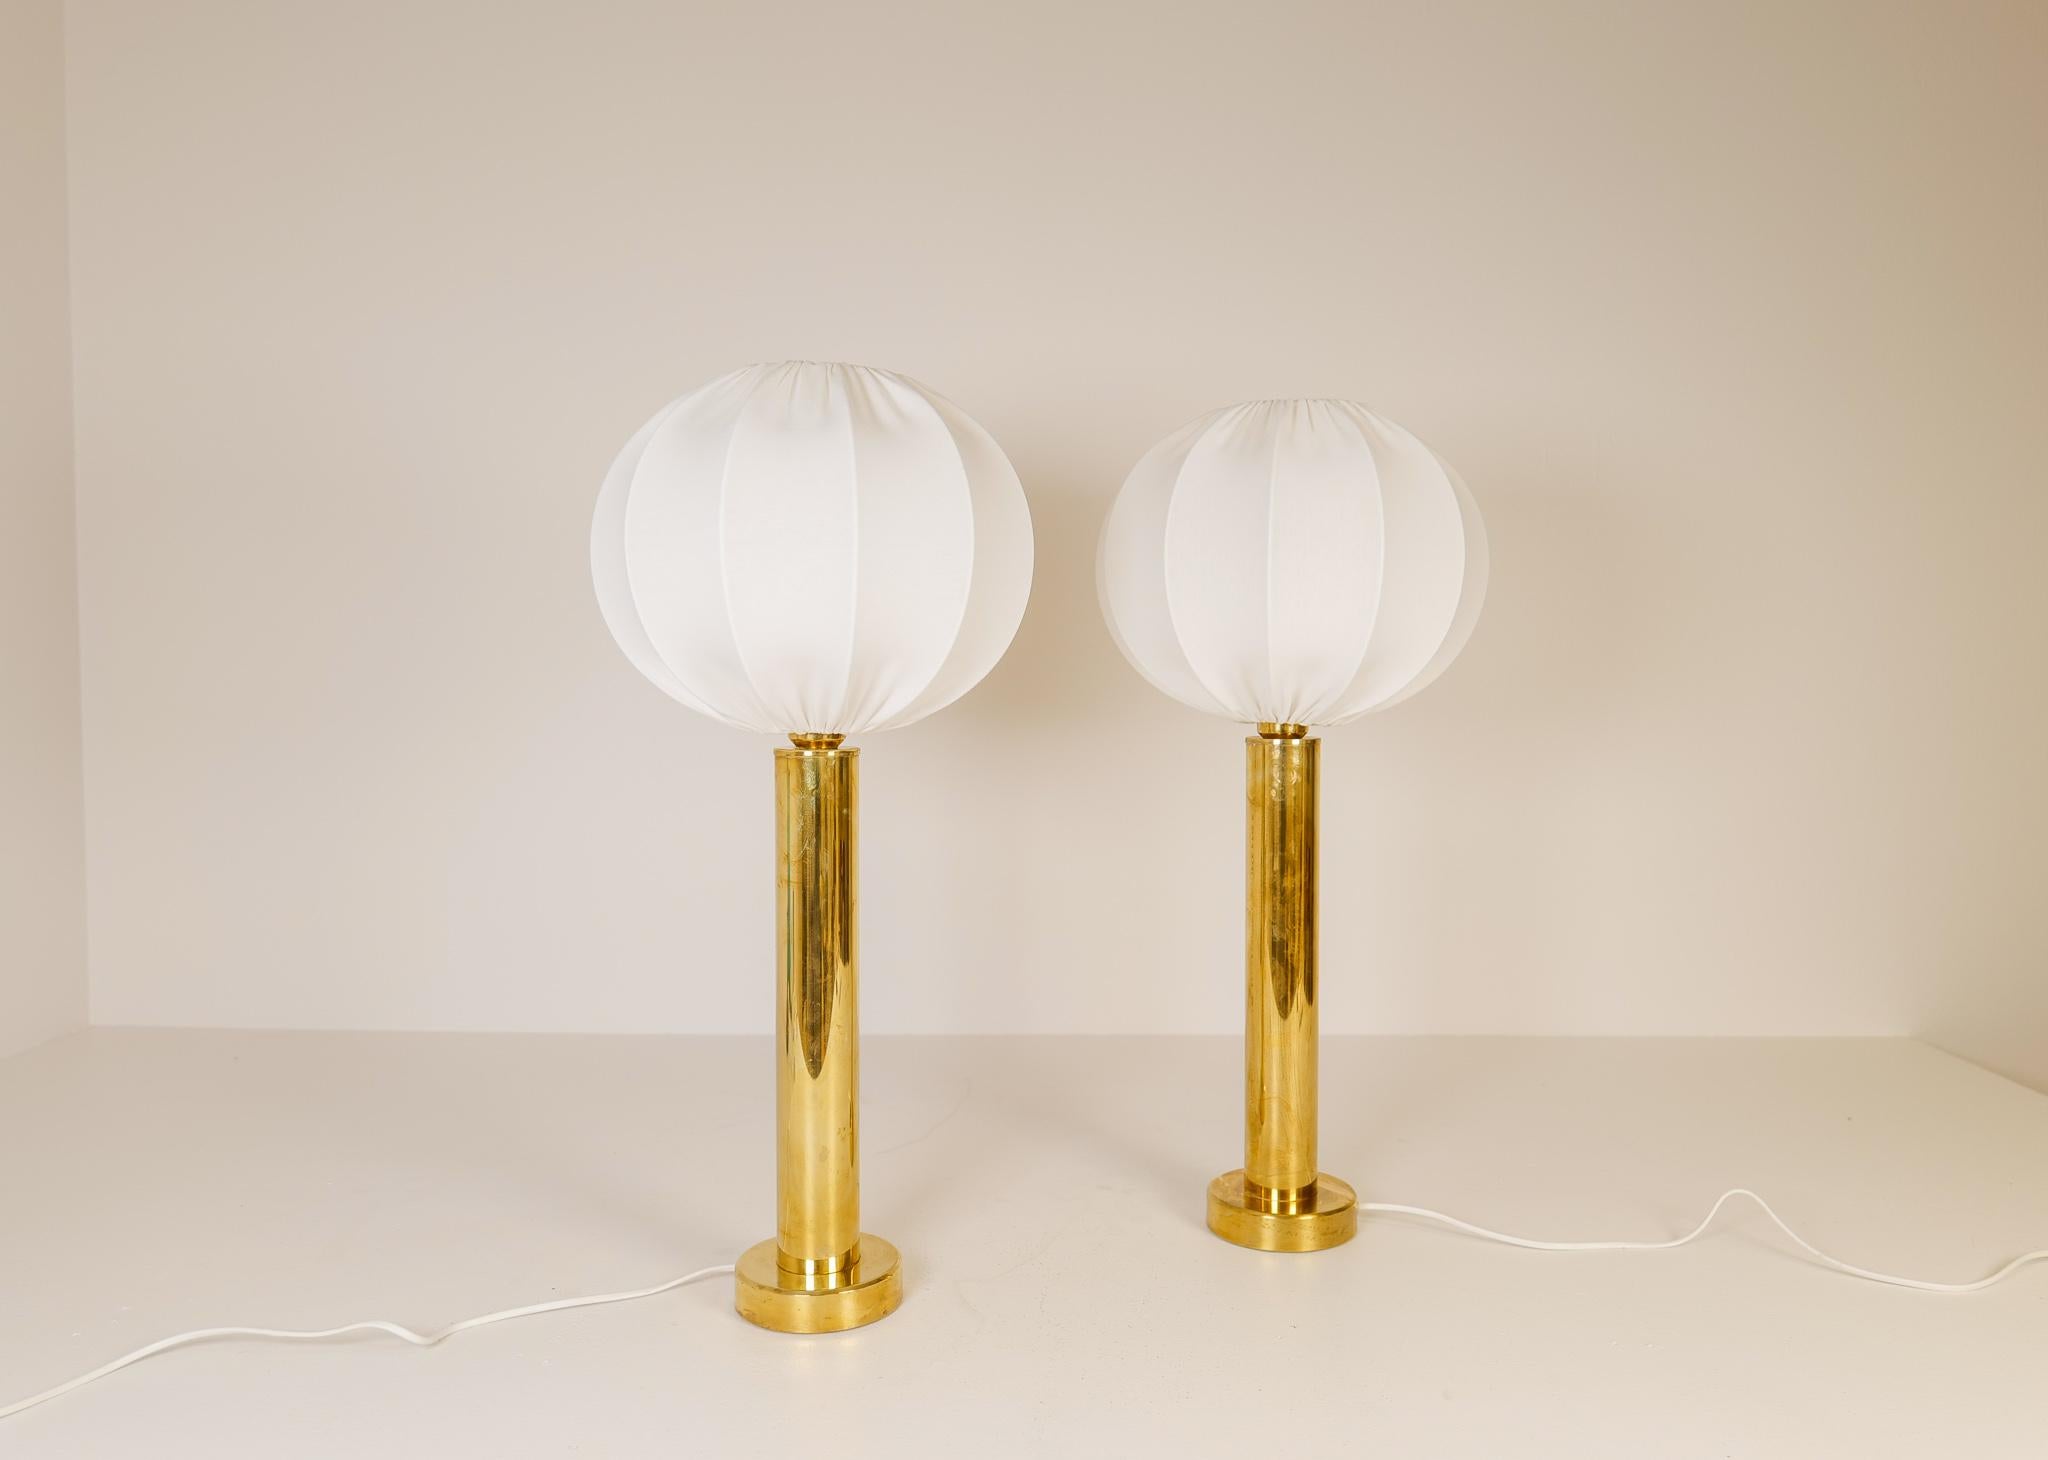 A pair of cylinder brass table lamps produced in Sweden during the late 1960s by Kosta Elarmatur. 

Good vintage condition with wear and age on the brass. All new high quality cotton shades made in Sweden. 

Dimensions: H 67 cm, Base Diameter 13